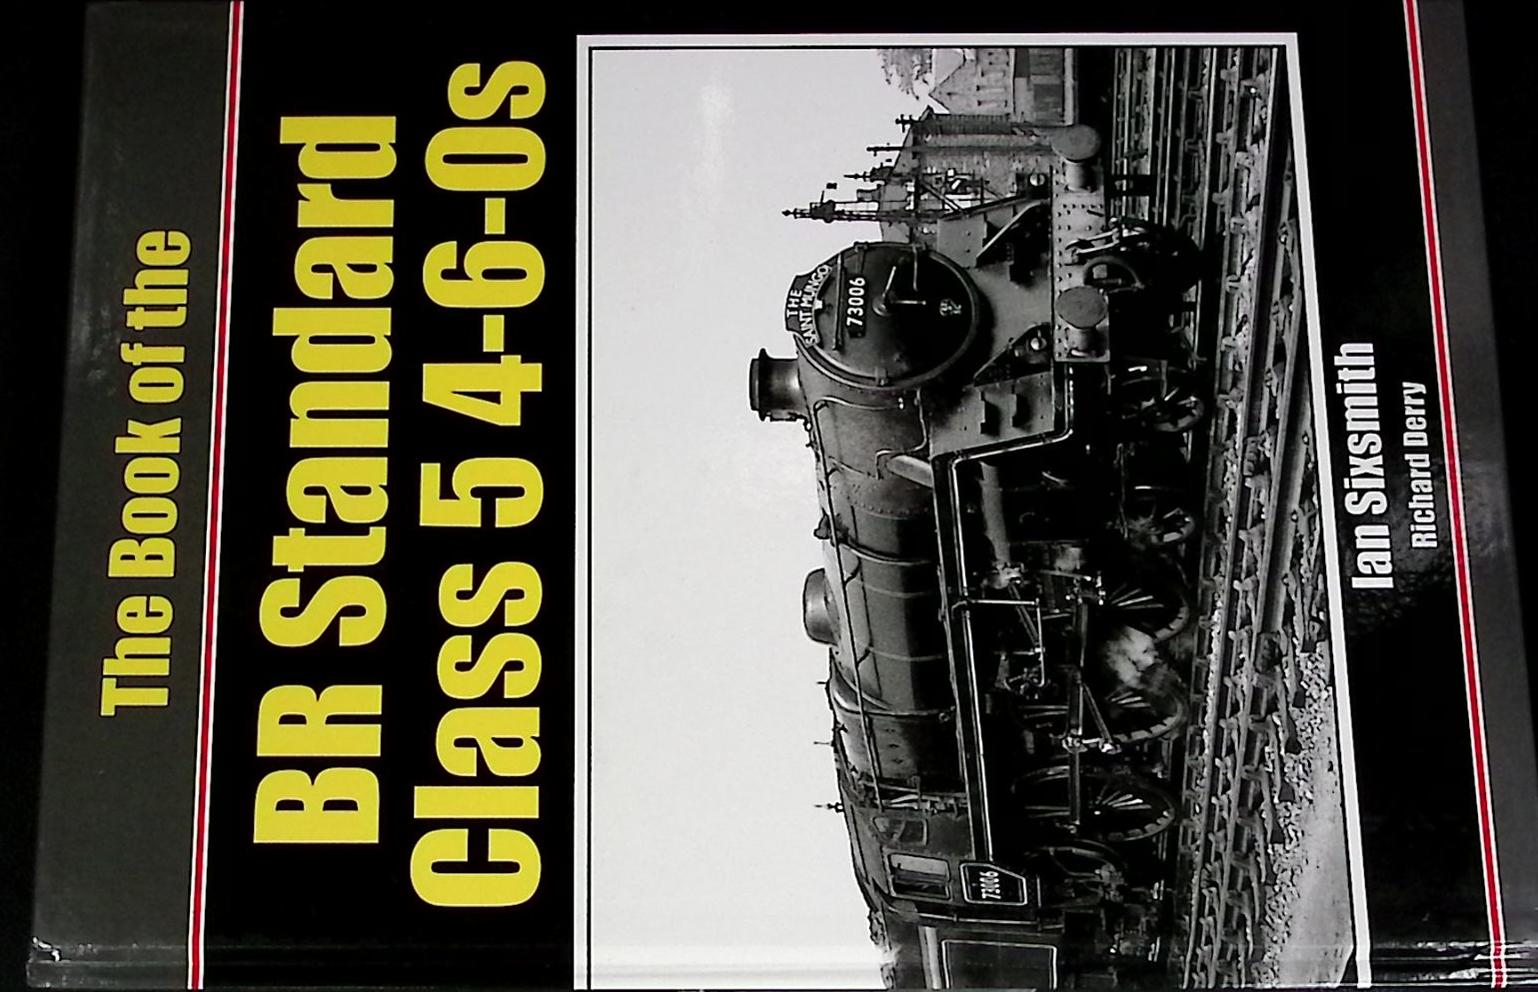 The Book of the Standard Class 5 4-6-0s